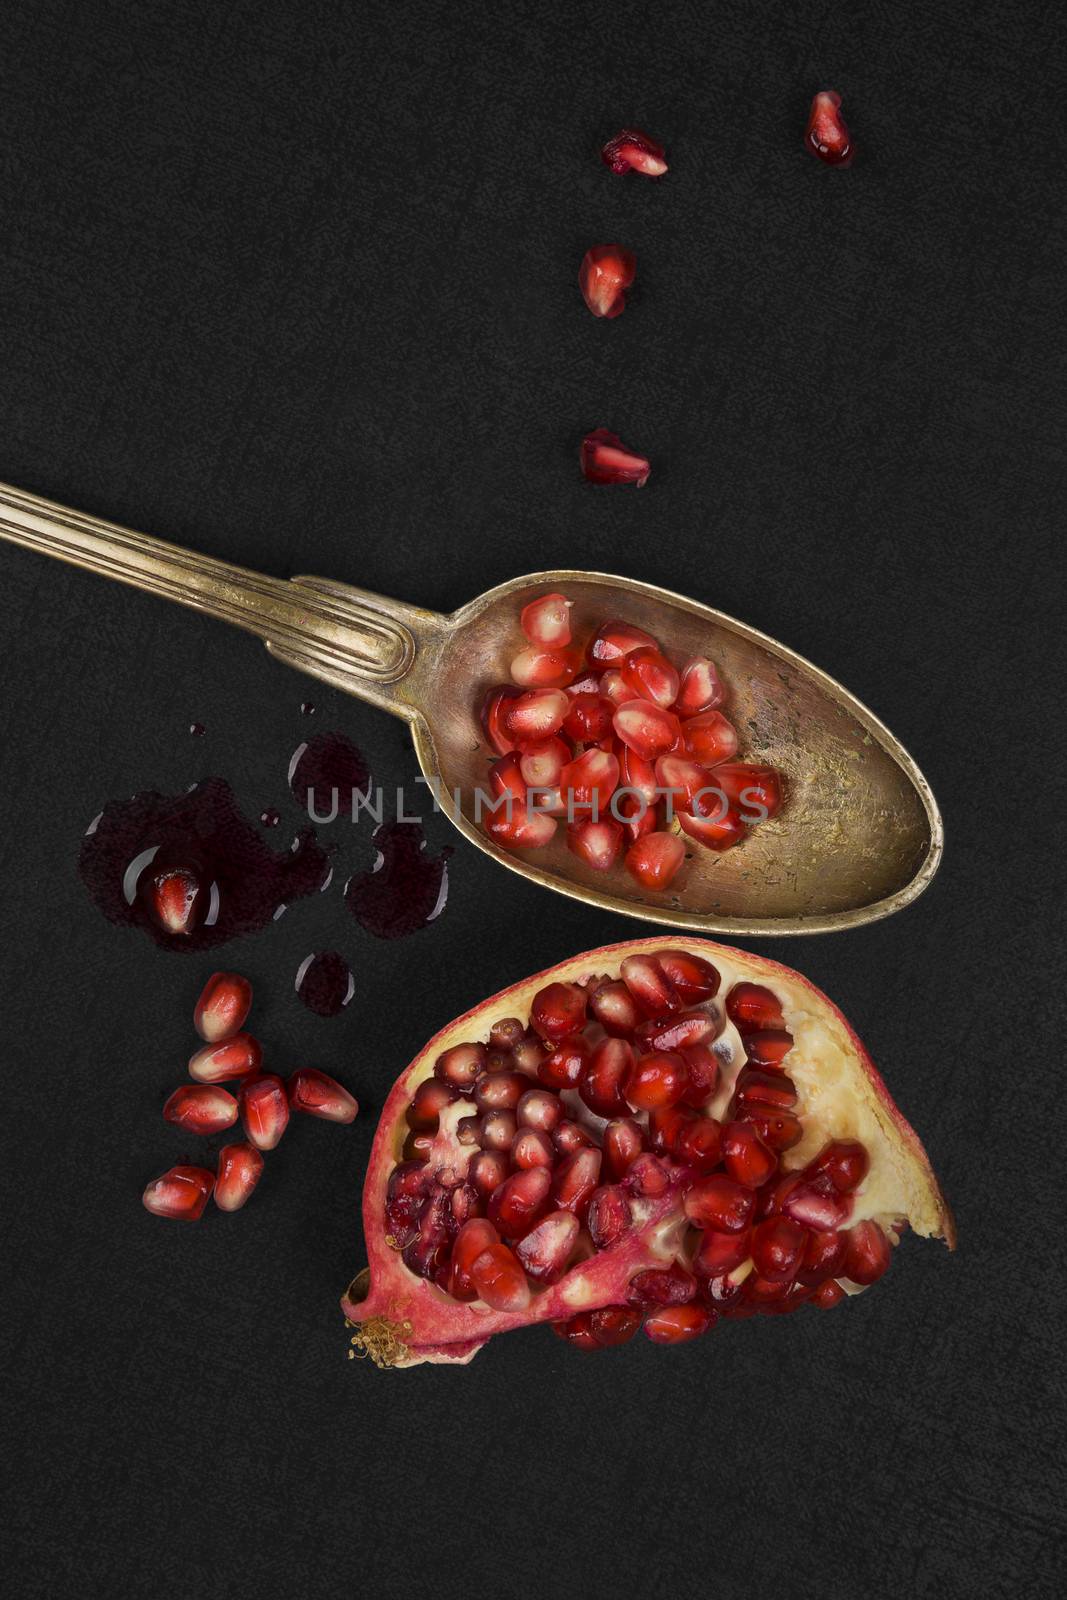 Healthy pomegranate background. Pomegranate core on black background, top view. Healthy fruit eating.